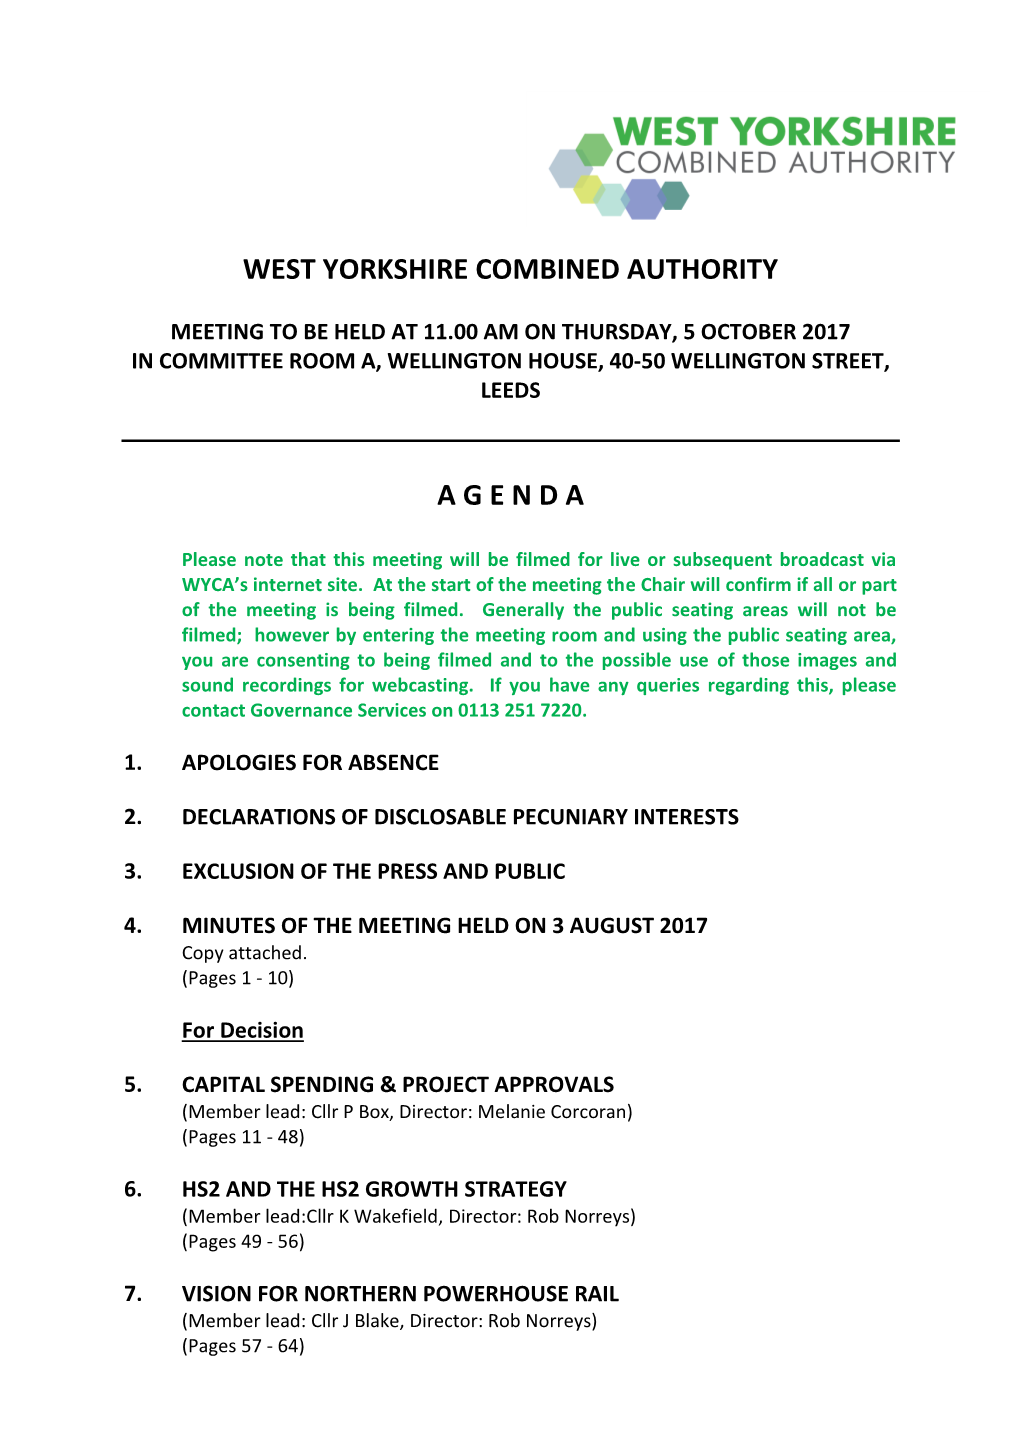 (Public Pack)Agenda Document for West Yorkshire Combined Authority